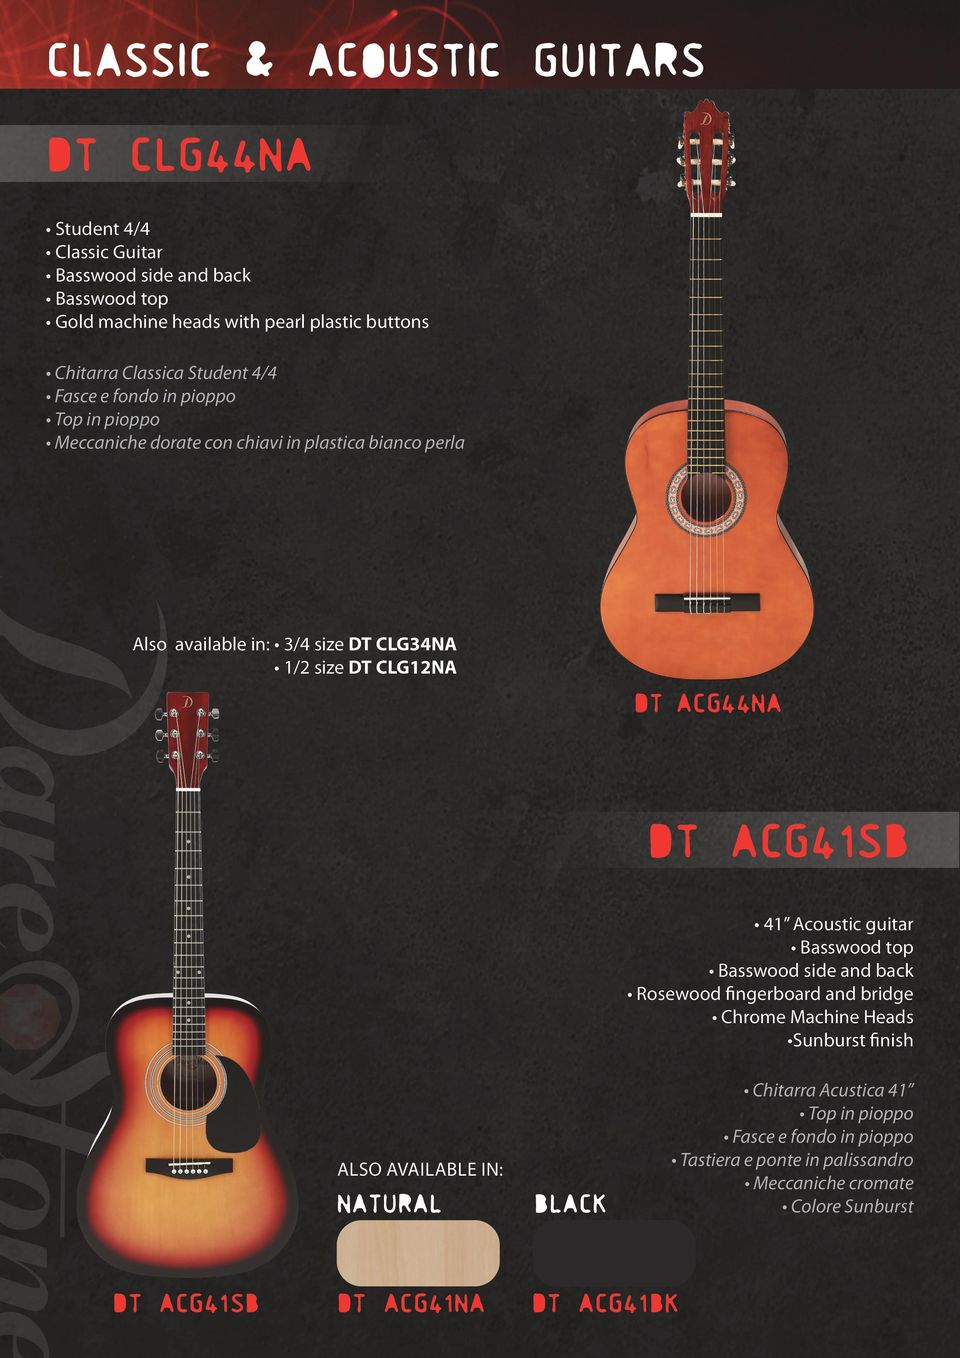 ACG44NA DT ACG41SB 41 Acoustic guitar Basswood top Basswood side and back Rosewood fingerboard and bridge Chrome Machine Heads Sunburst finish ALSO AVAILABLE IN: